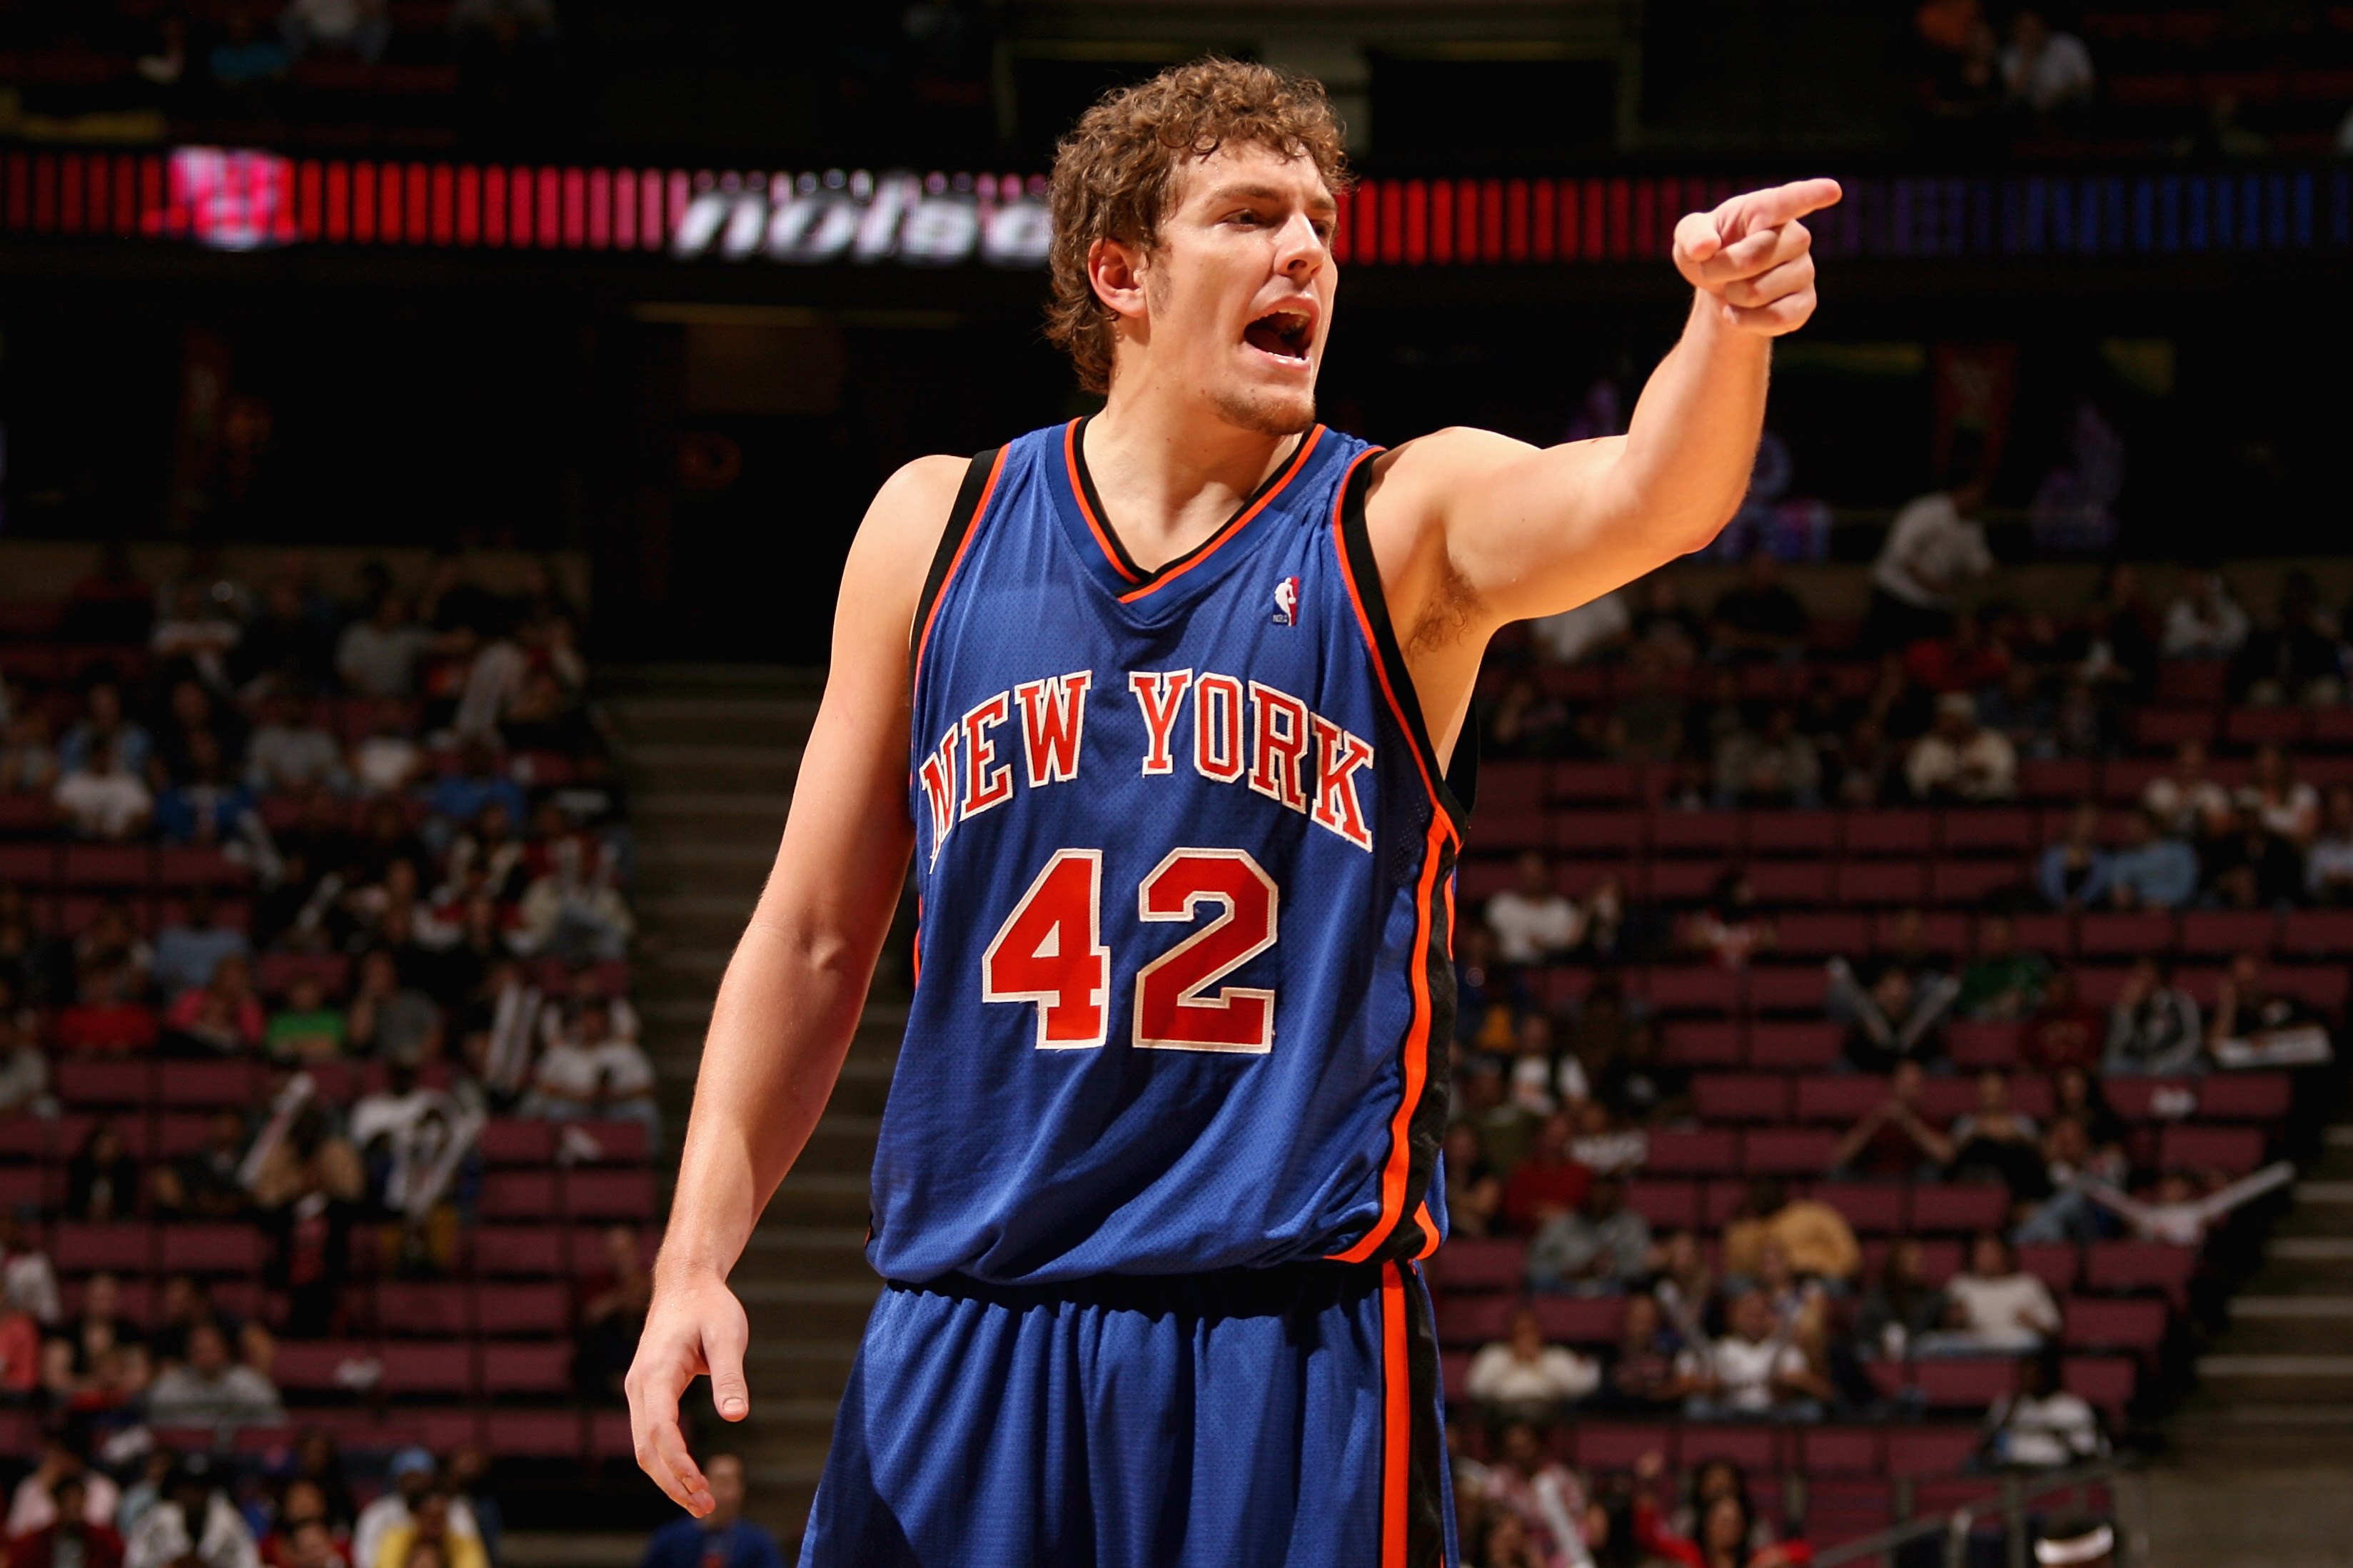 Congrats David Lee on a great career! Once a Knick, Always a Knick.